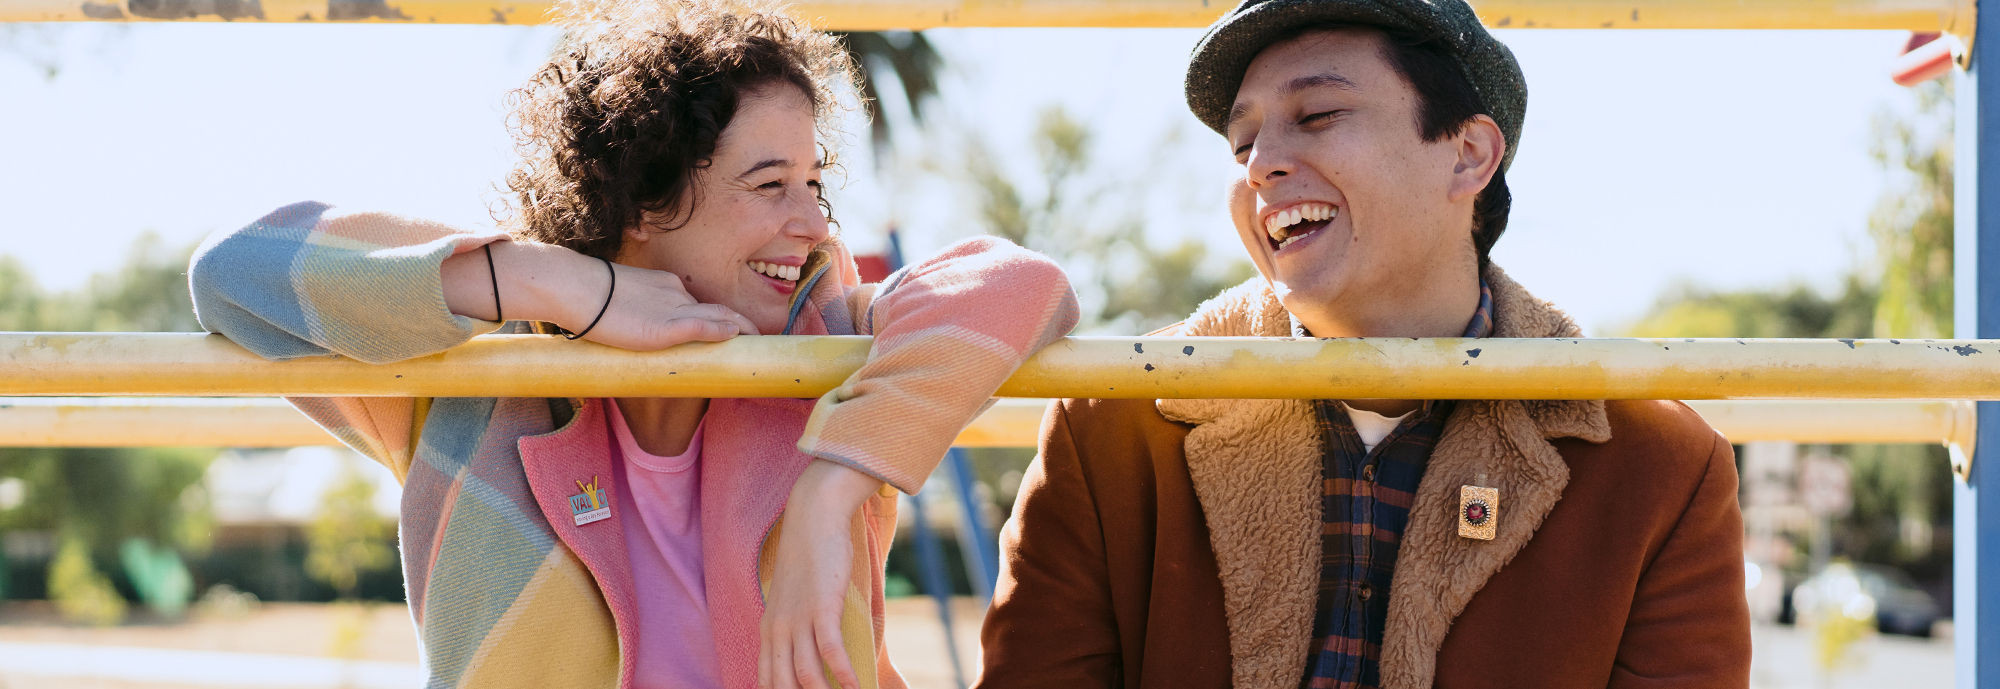 A couple laughing while sitting on a yellow fence railing 